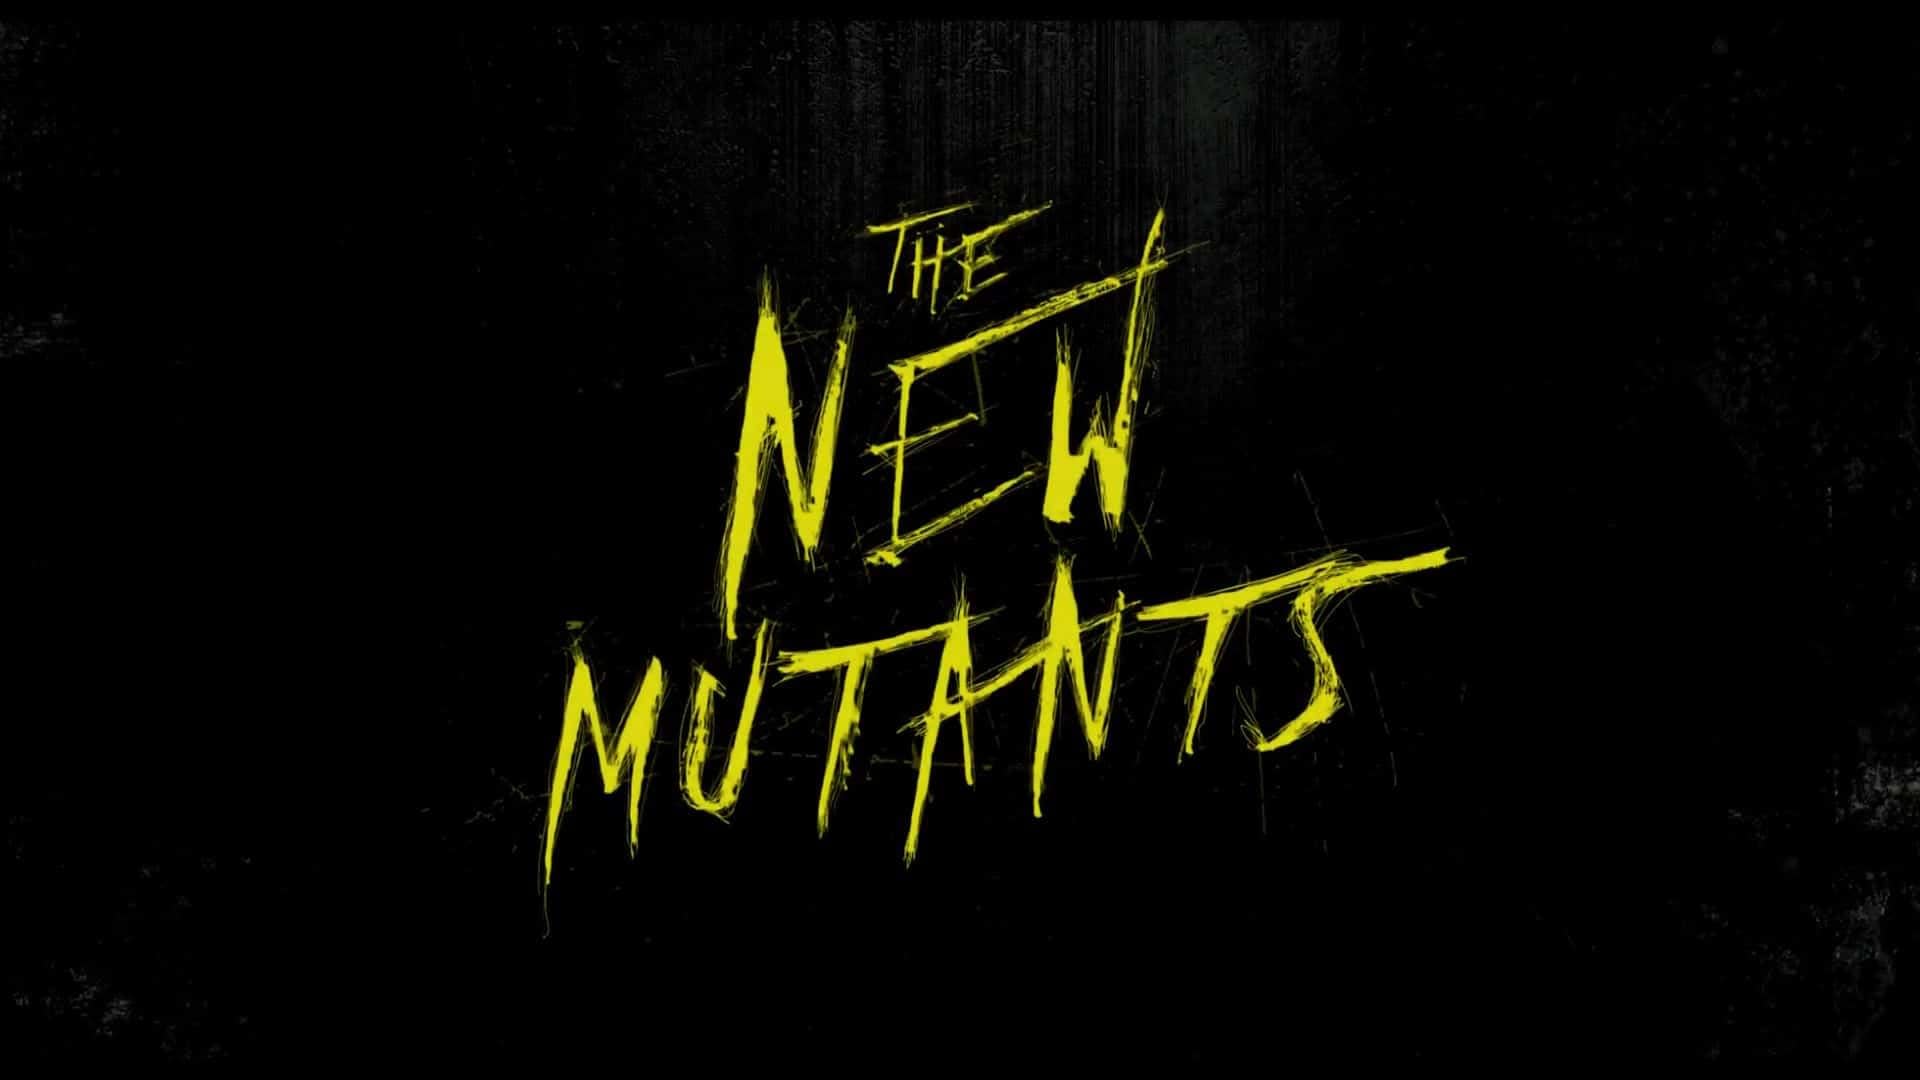 *UPDATE* Toy Fair Presentation Offers a Strange New Release Date for The New Mutants